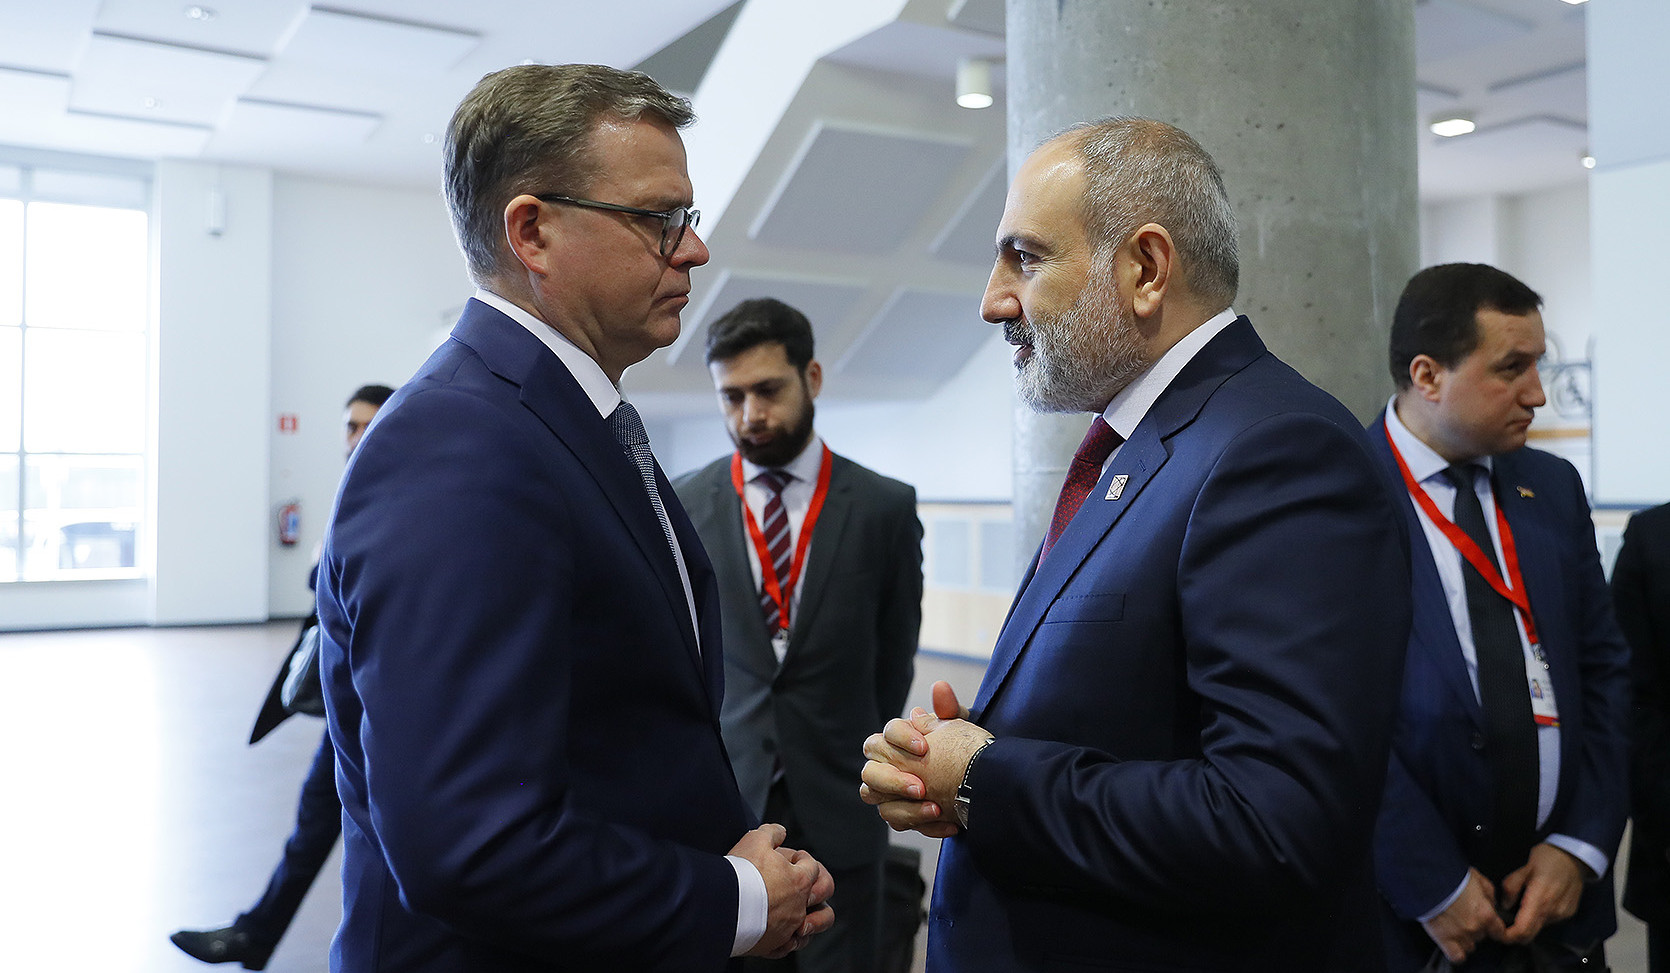 Prime Ministers of Armenia and Finland meet in Brussels